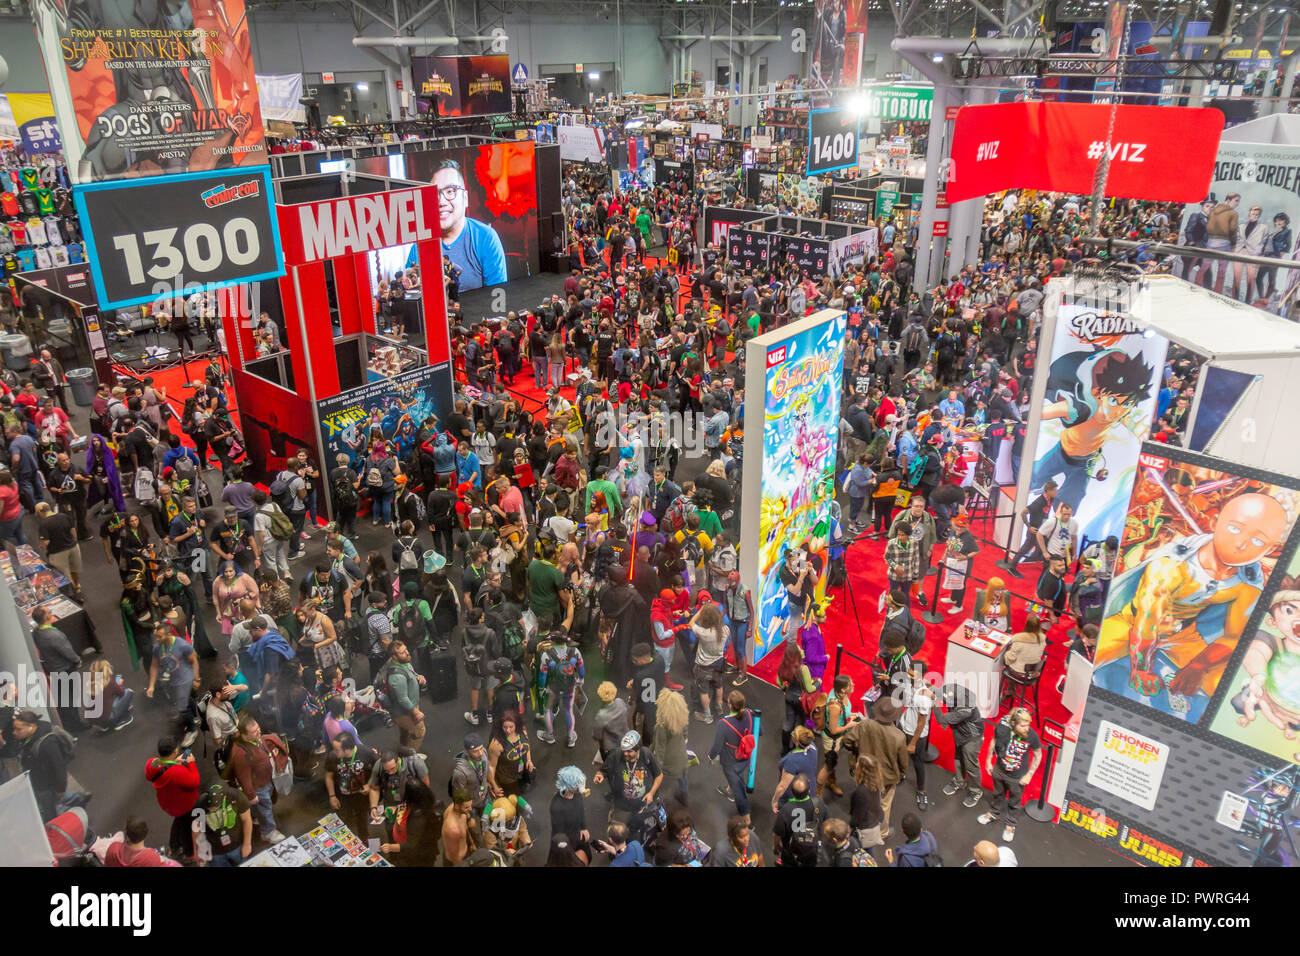 A crowd of visitors and fans to the New York Comic Con comic book and movie convention. Stock Photo